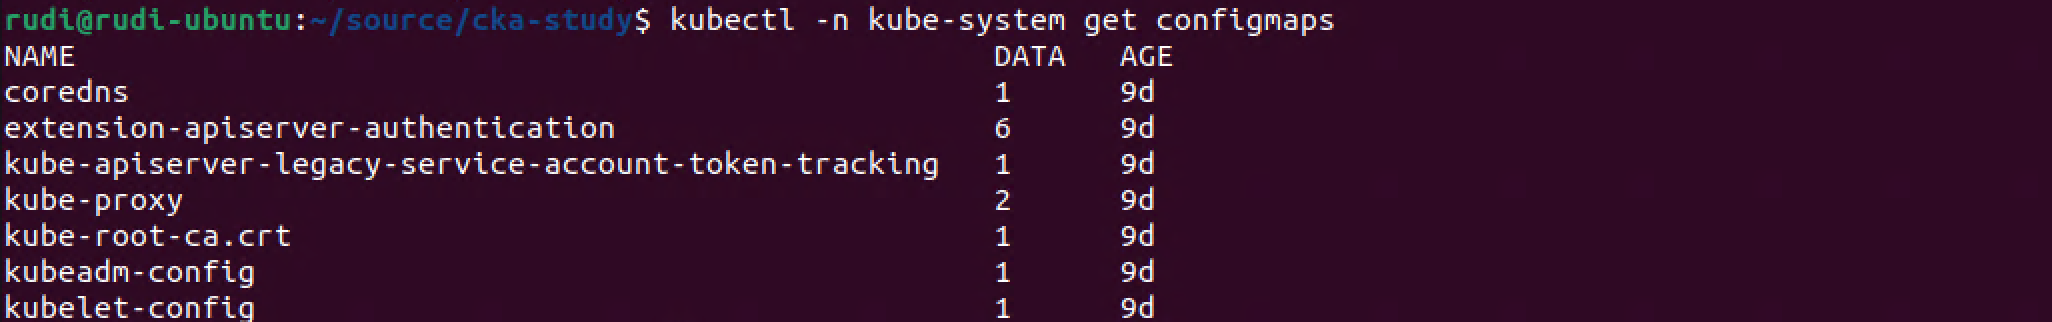 kube-system configmaps